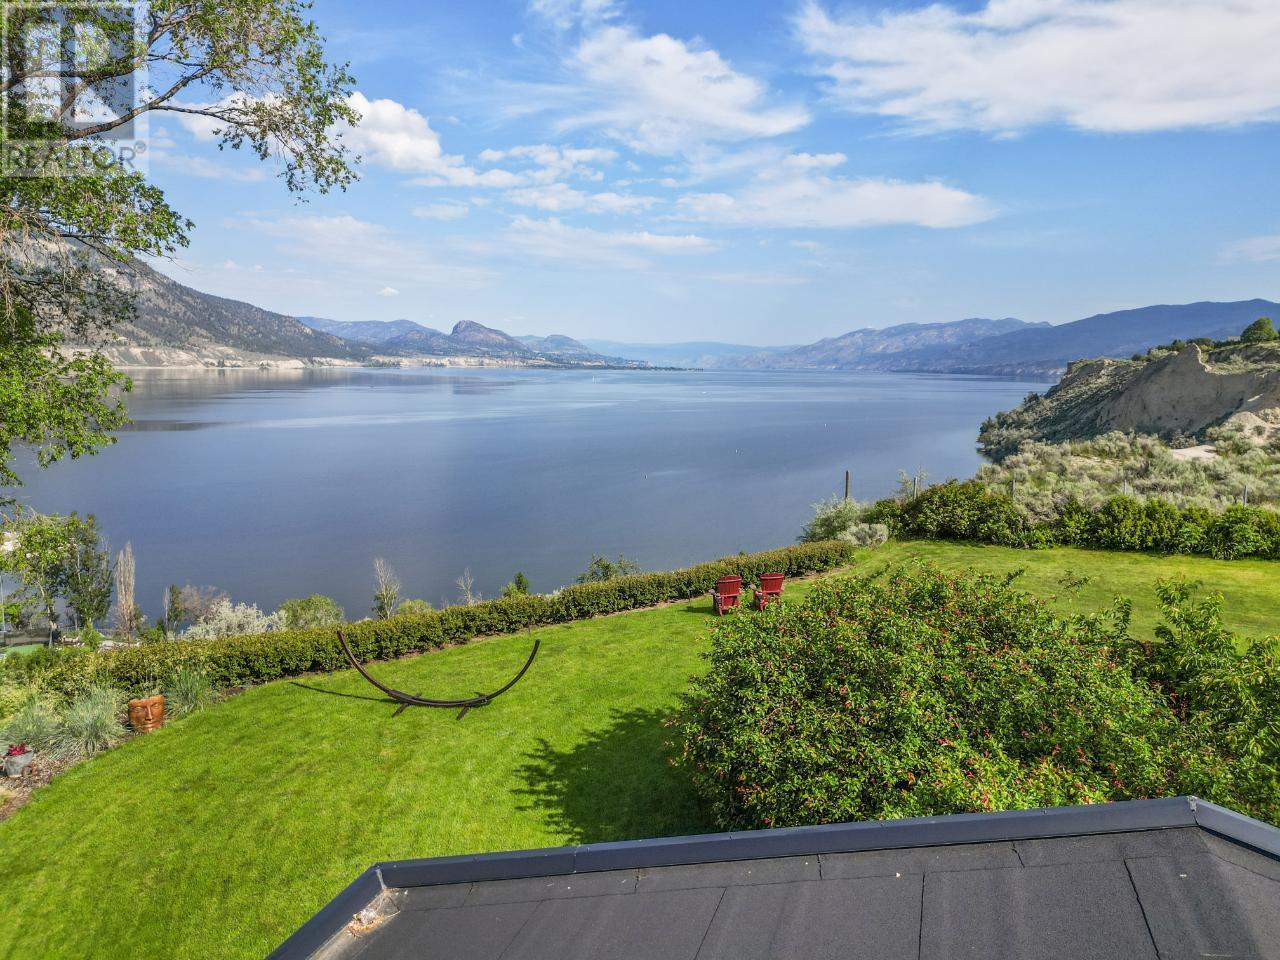      150 VANCOUVER Place  , Penticton, South Okanagan,  ;  Listing Number: MLS 200291